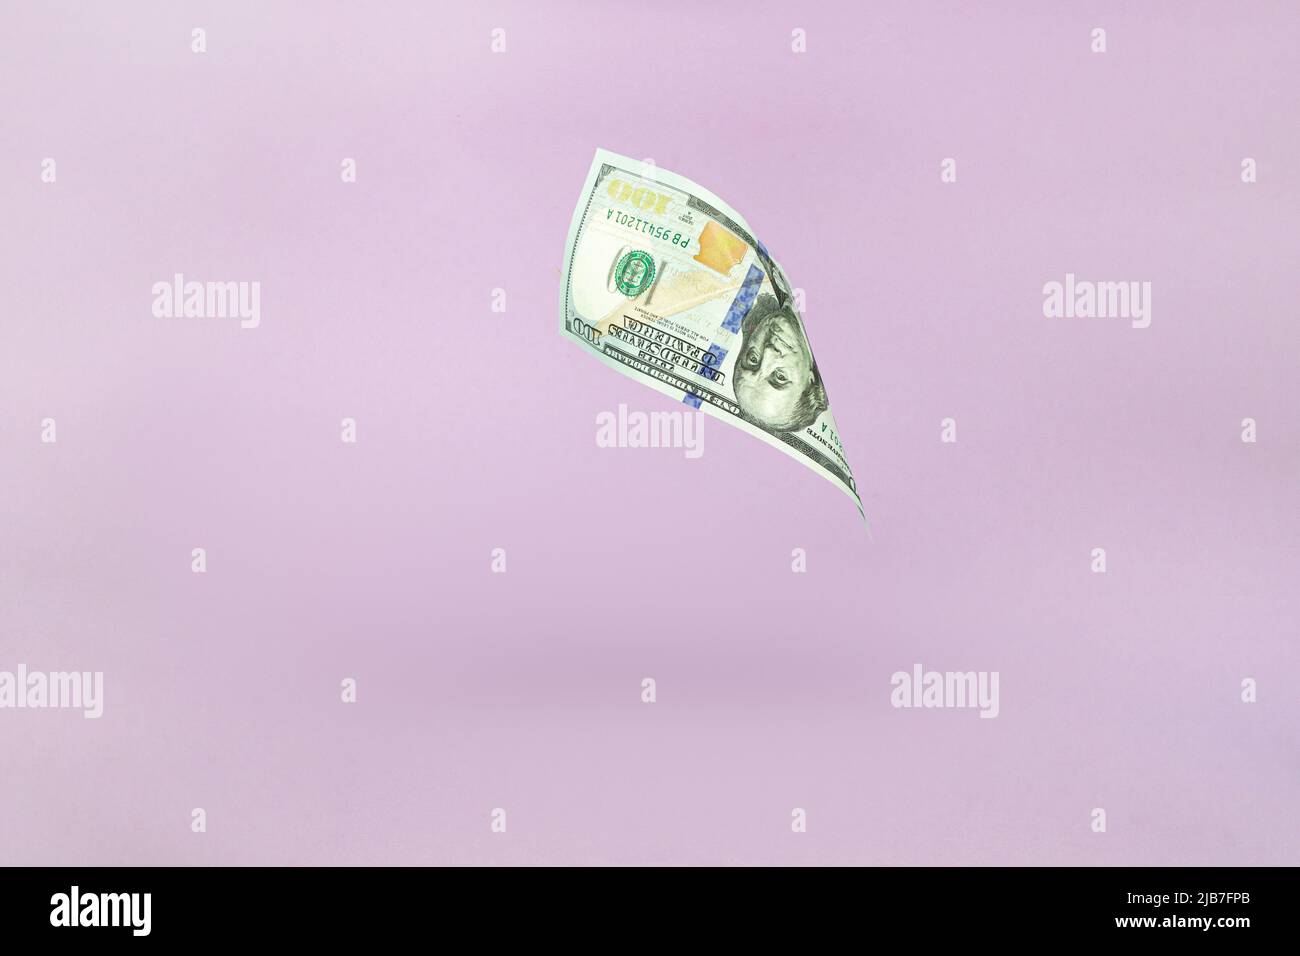 One hundred American dollars. 100. Flying of US dollar banknote on pink pastel background. Investment and saving concept Stock Photo